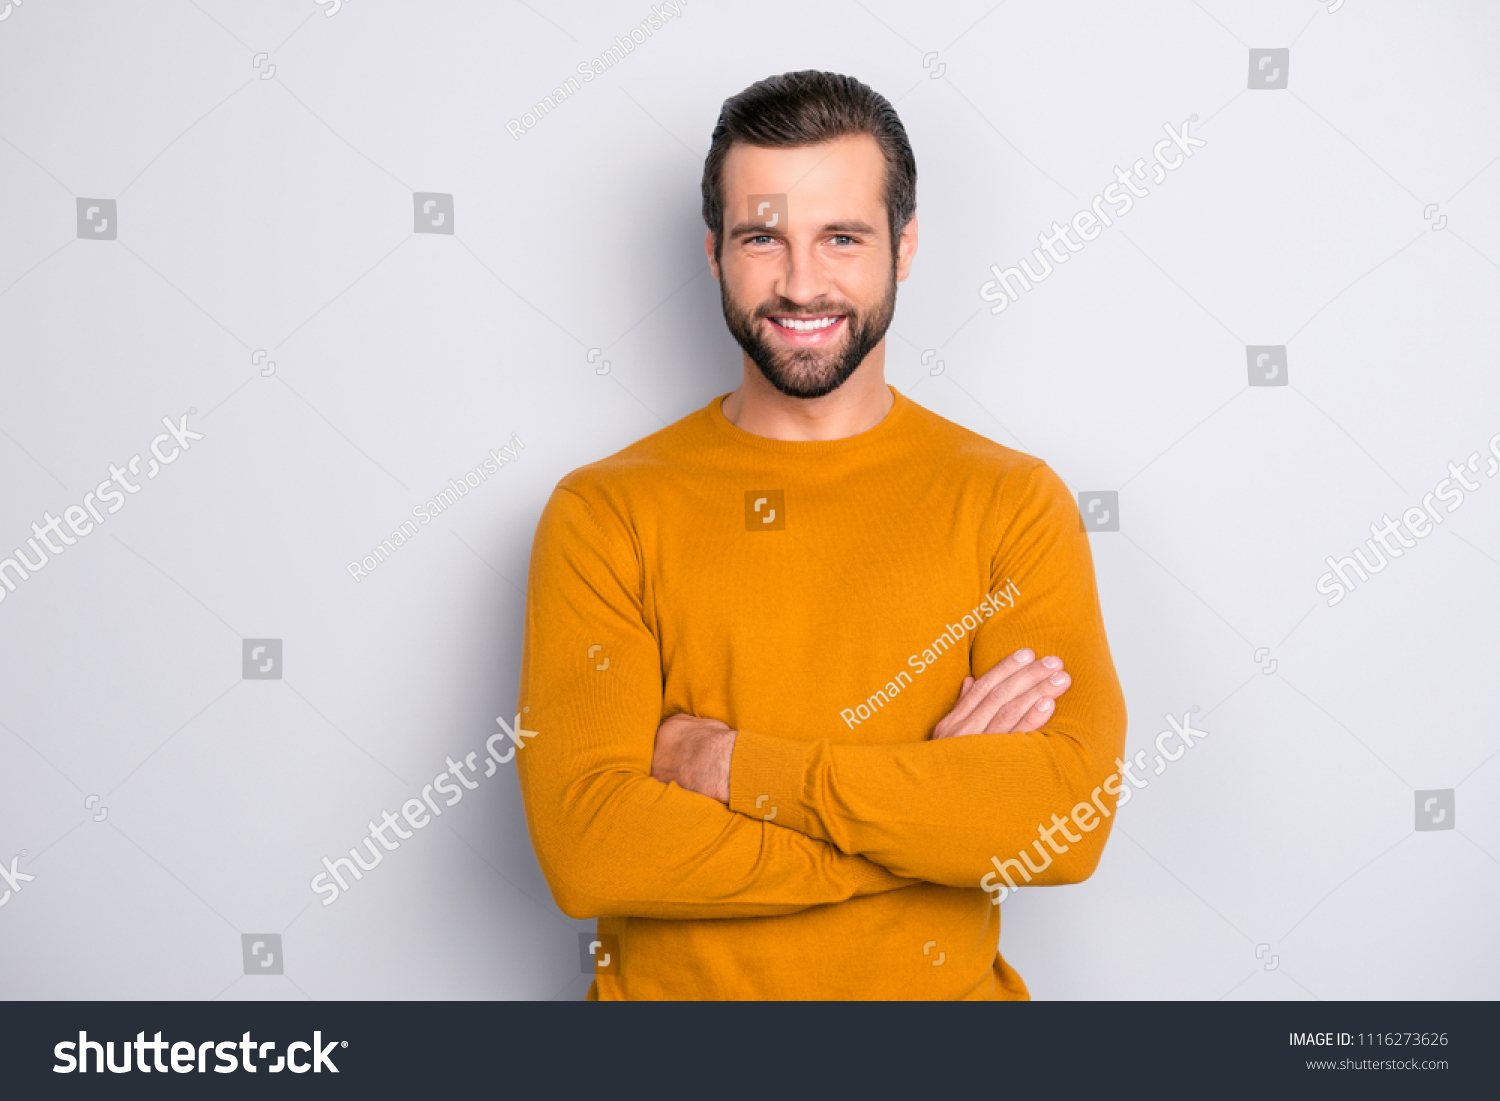 Portrait of attractive self-assured with beaming shiny smile haircut with long furfur wearing casual classic color of mustard sweater macho man standing with folded arms isolated on gray background #1116273626